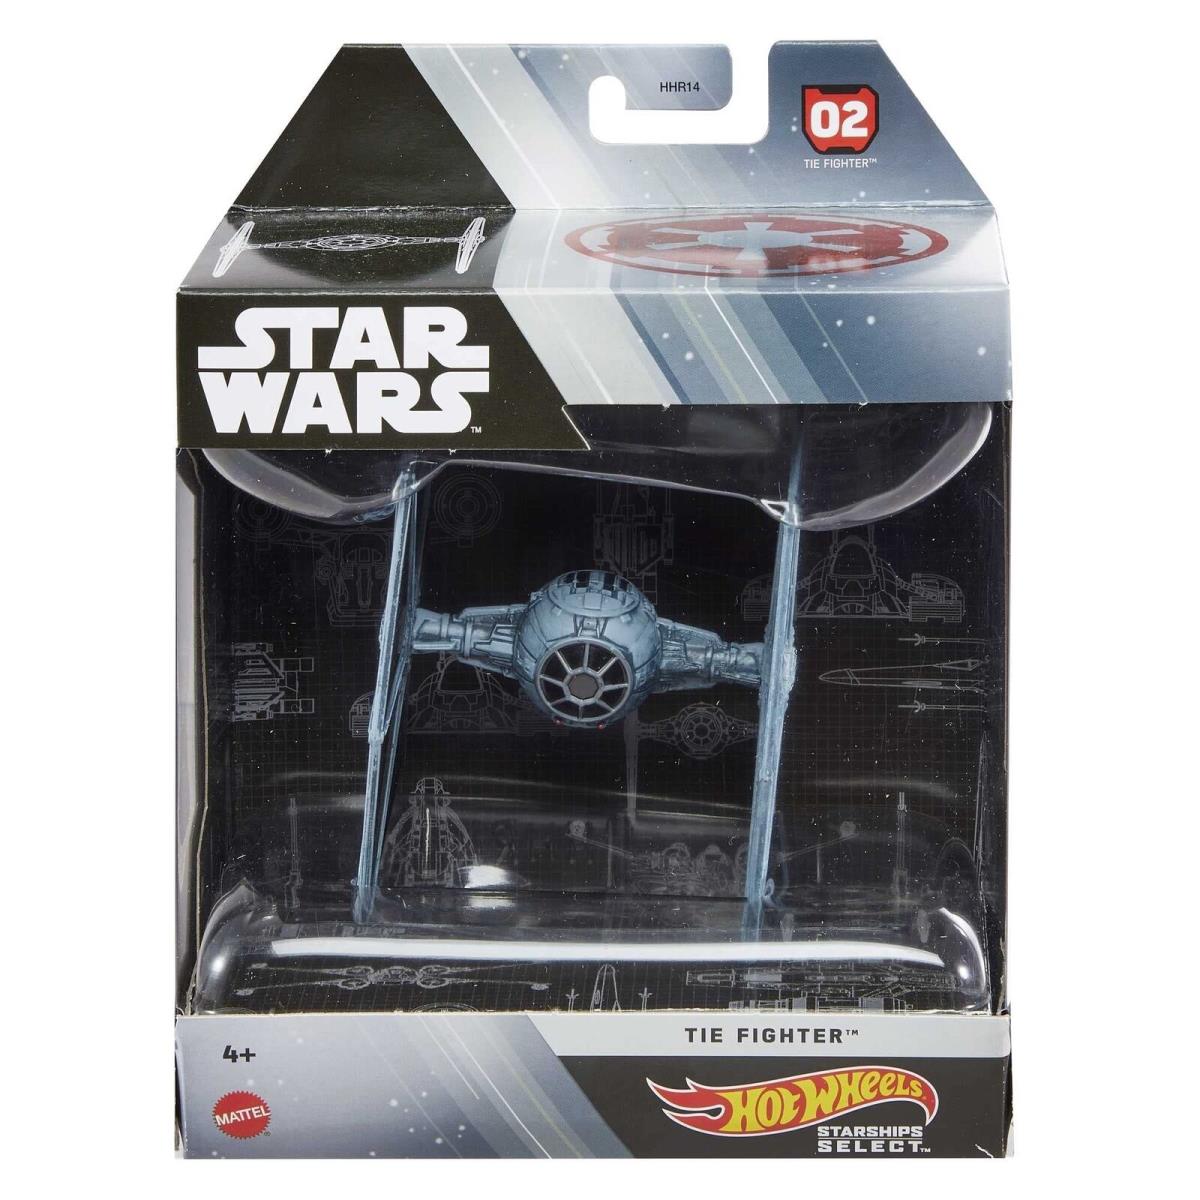 Hot Wheels Star Wars Starships Select Premium Gift For Adults - Hot